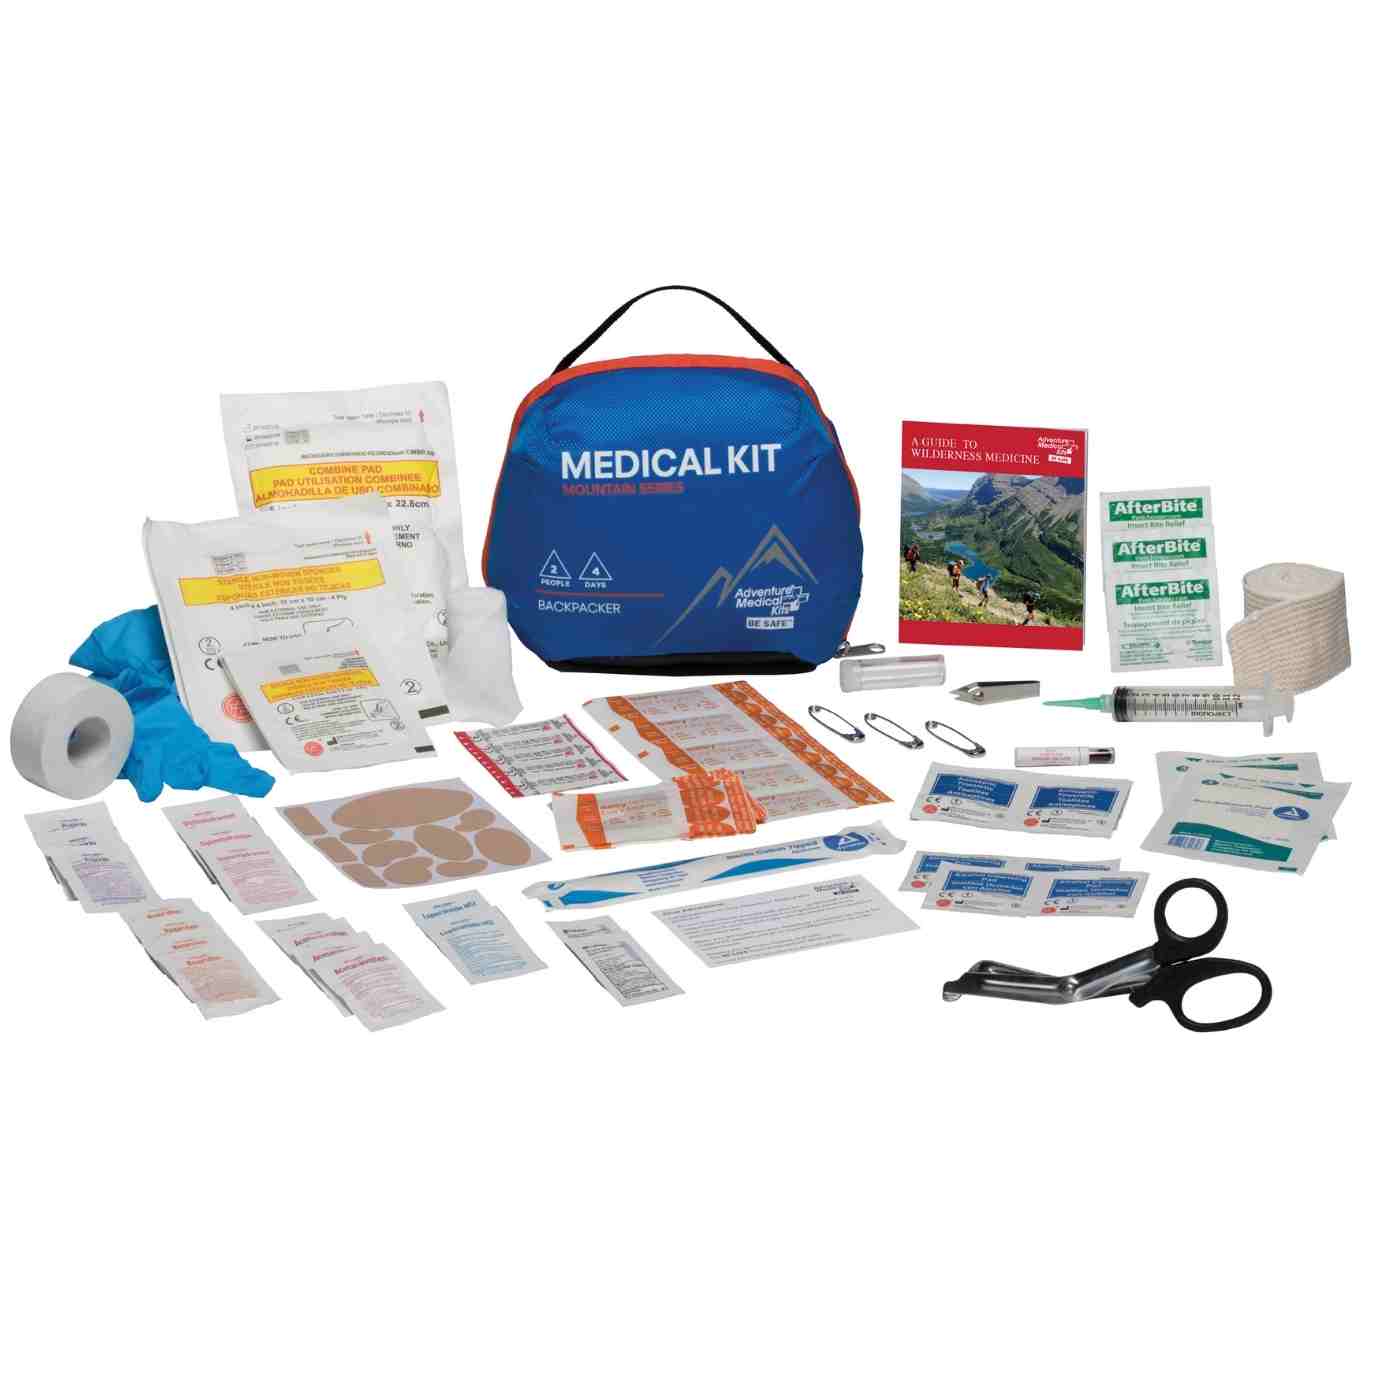 Mountain Series Medical Kit - Backpacker contents